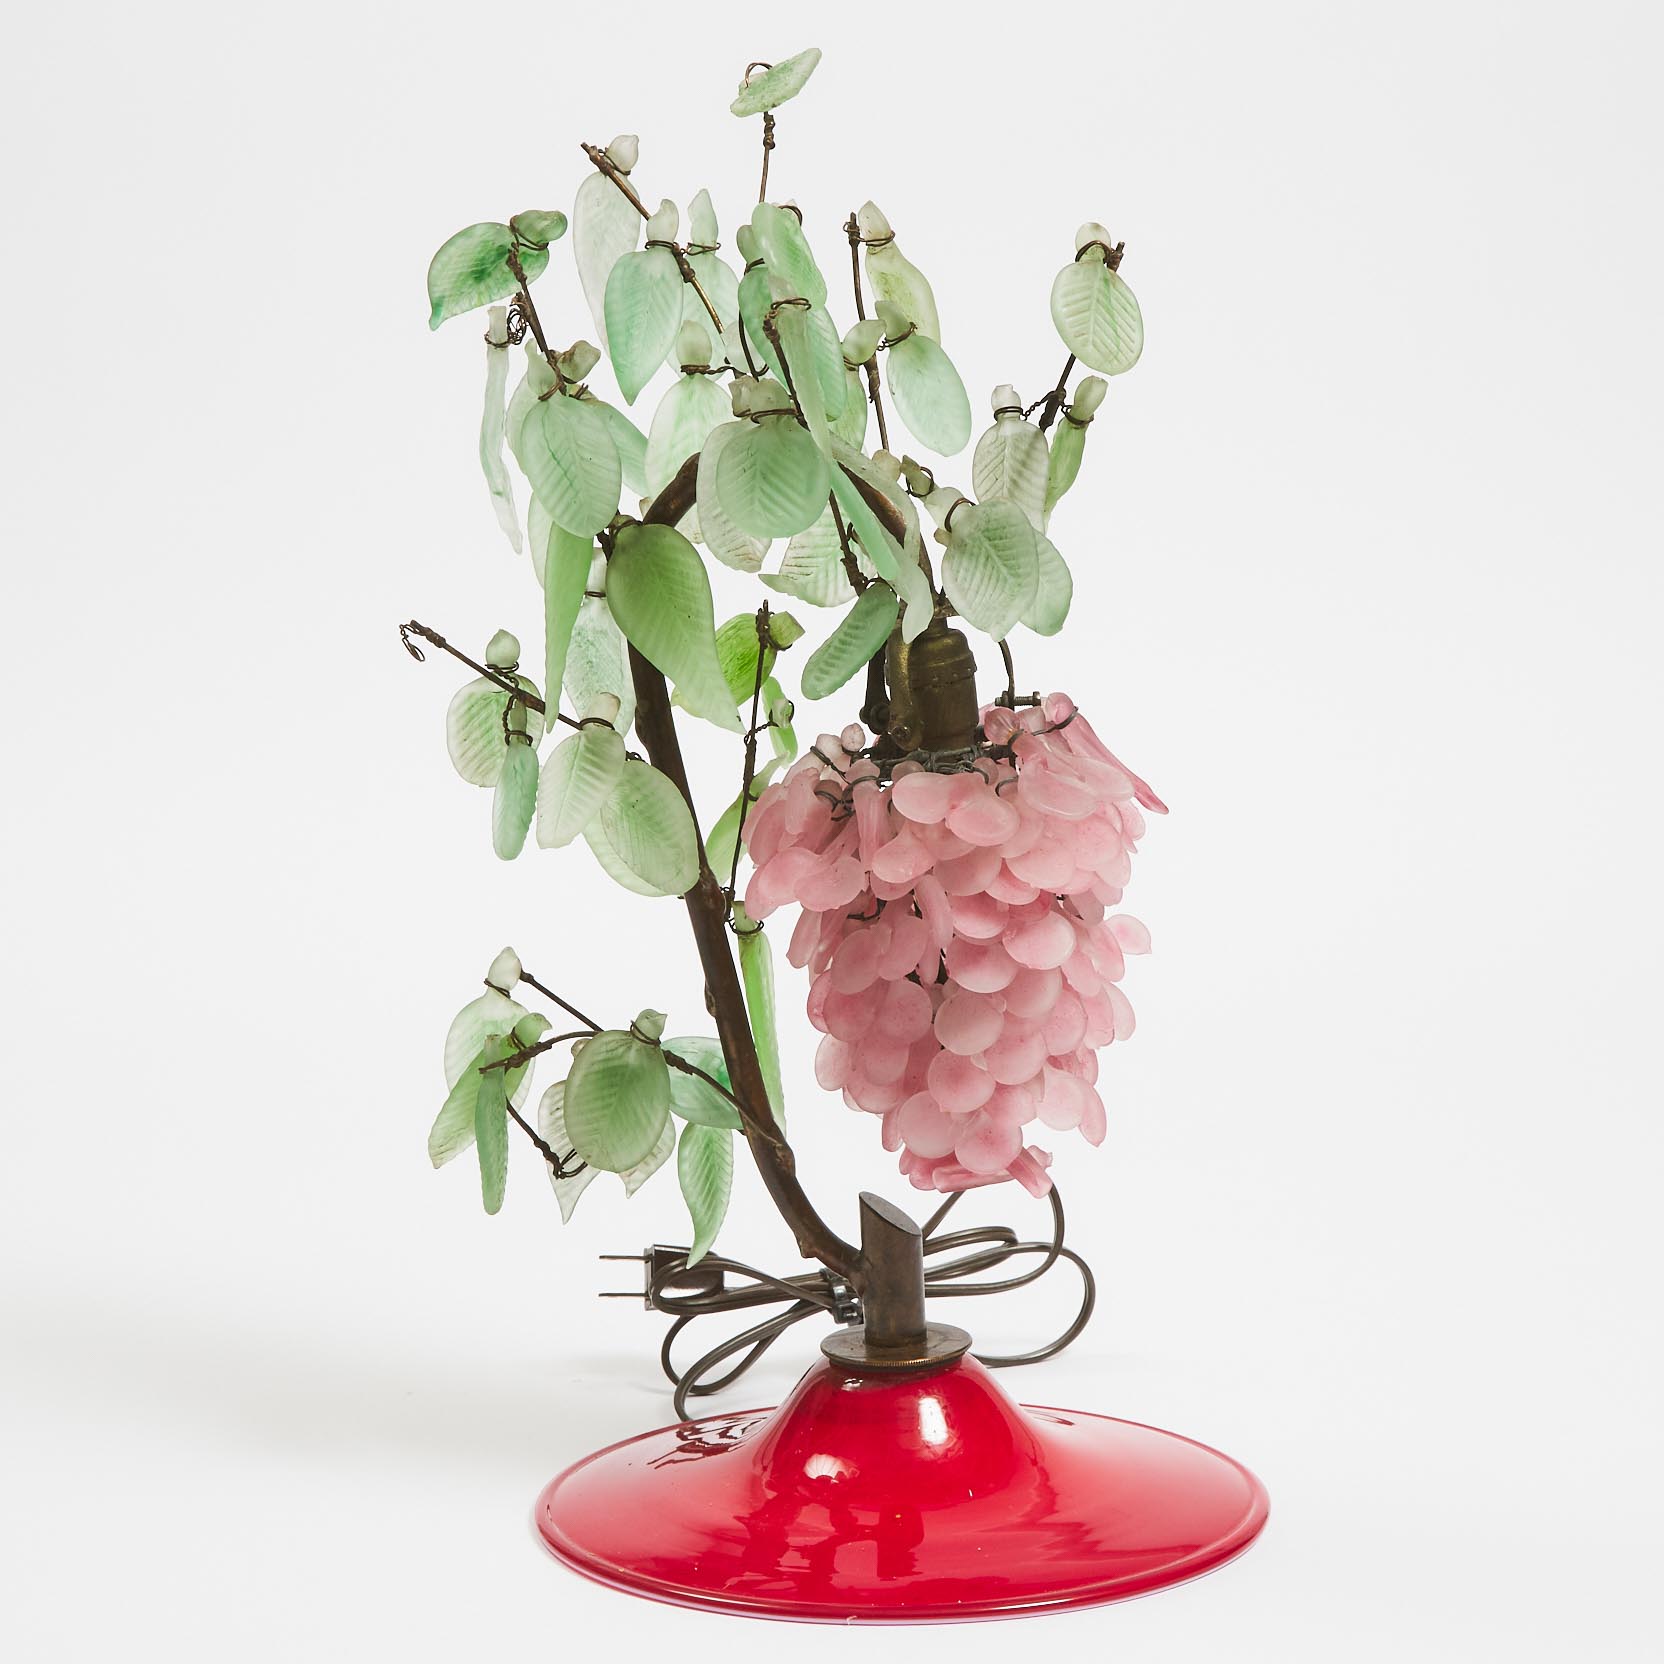 Italian Glass Lilac Branch with Blossom Form Table Lamp, Murano, early-mid 20th century